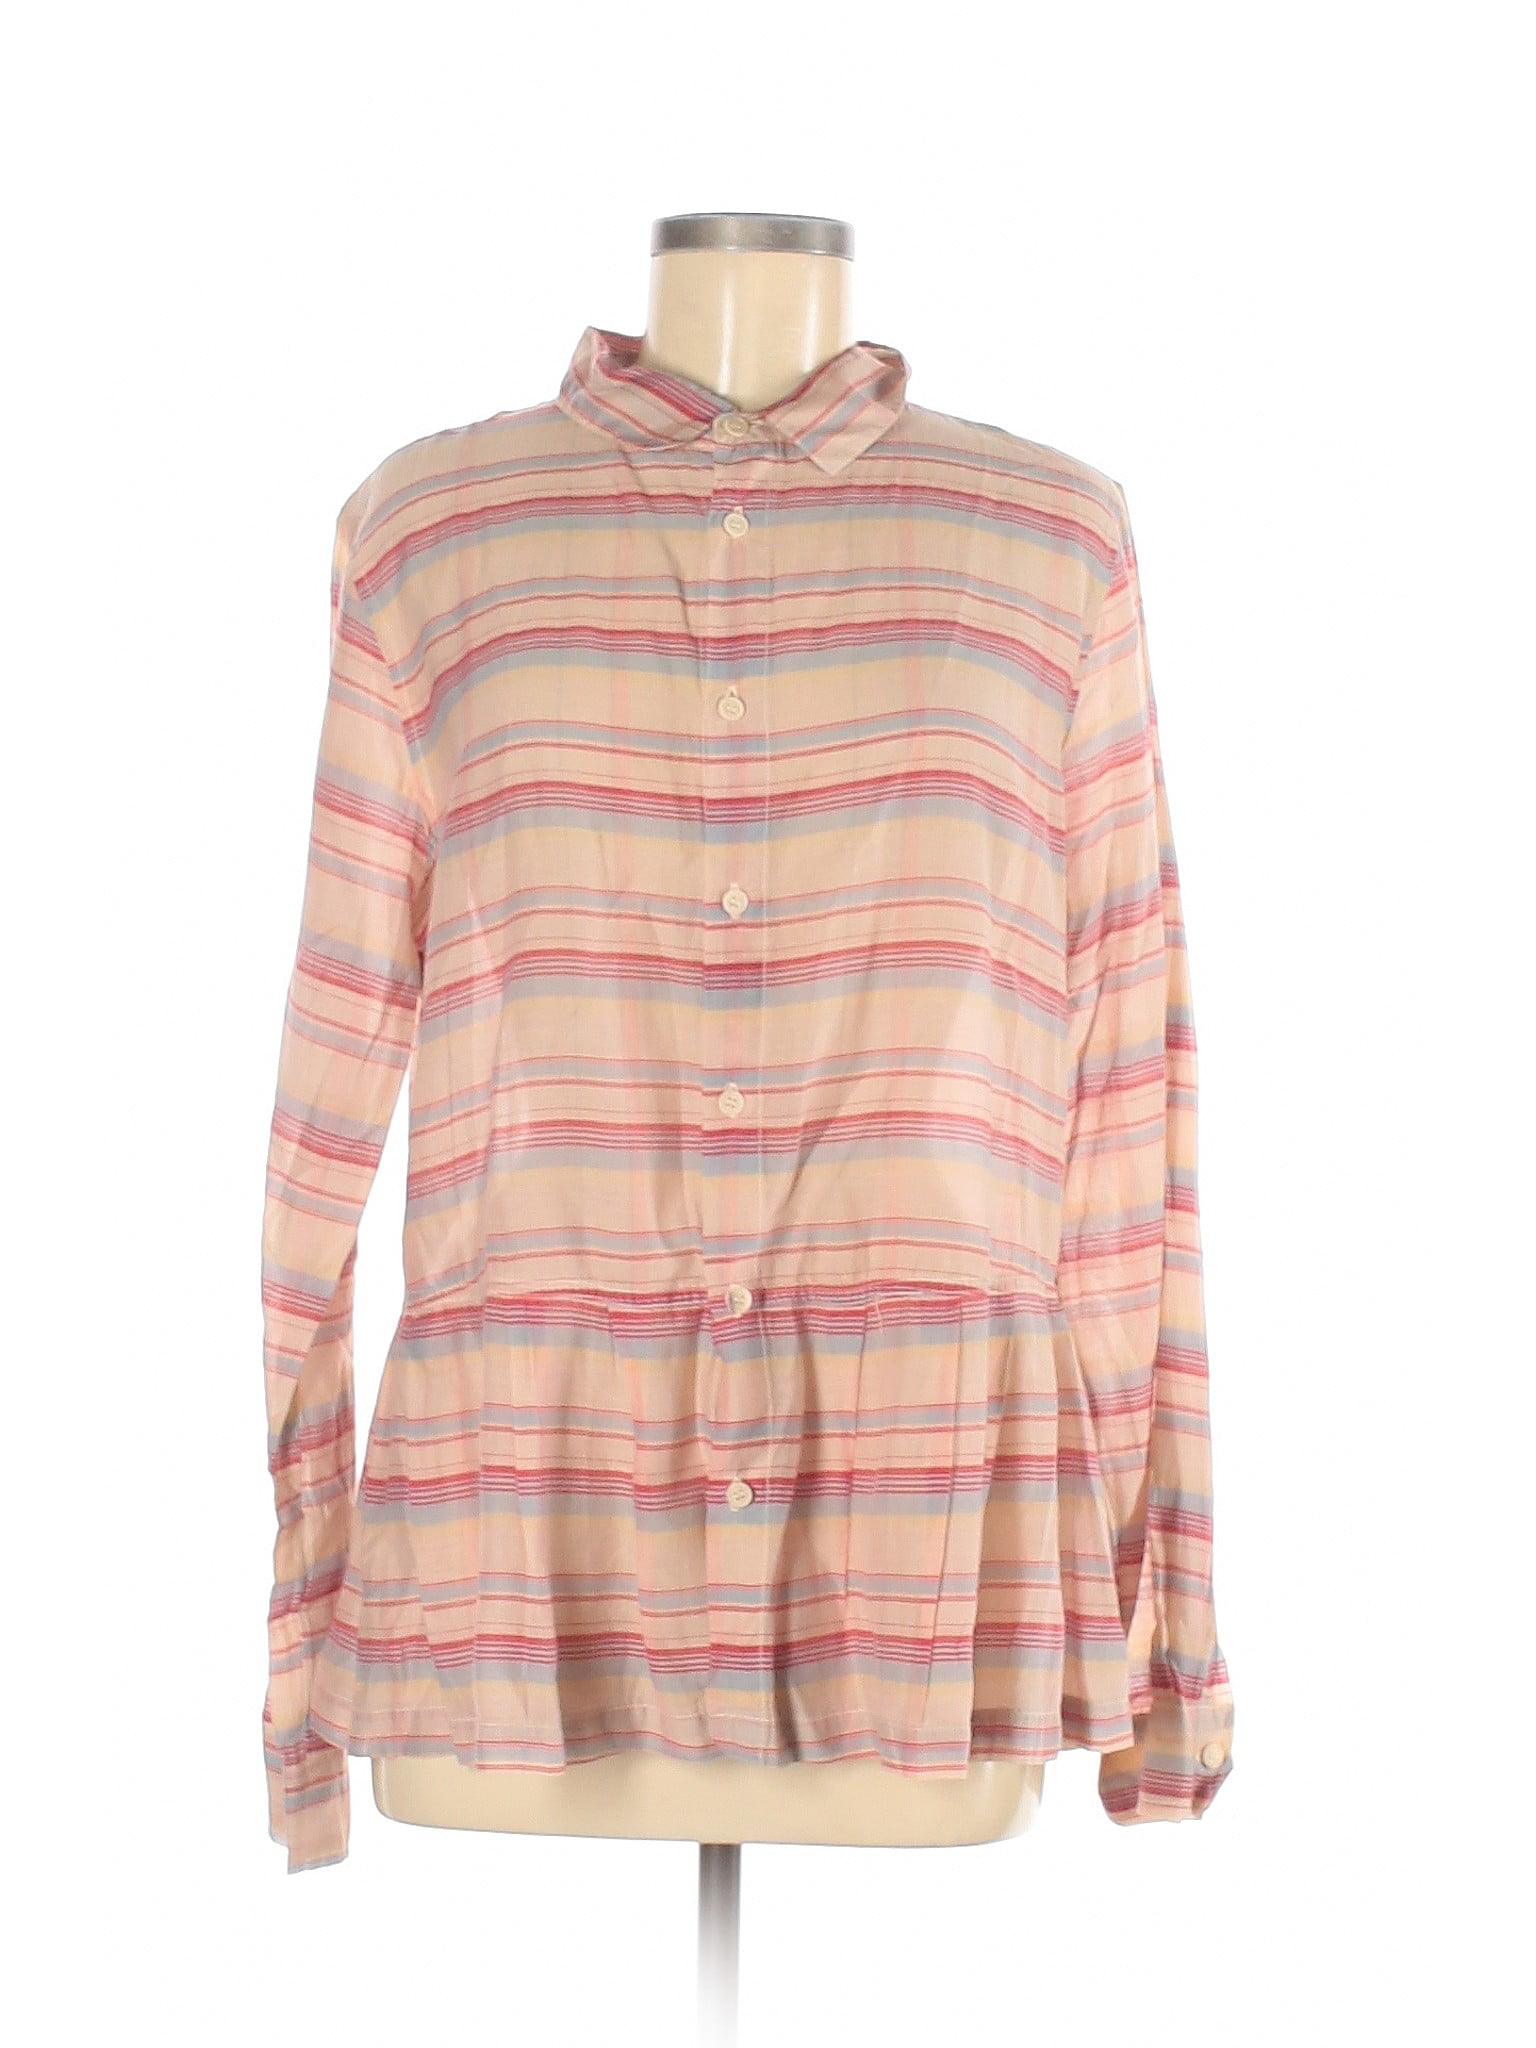 CP Shades - Pre-Owned CP Shades Women's Size M Long Sleeve Button-Down ...